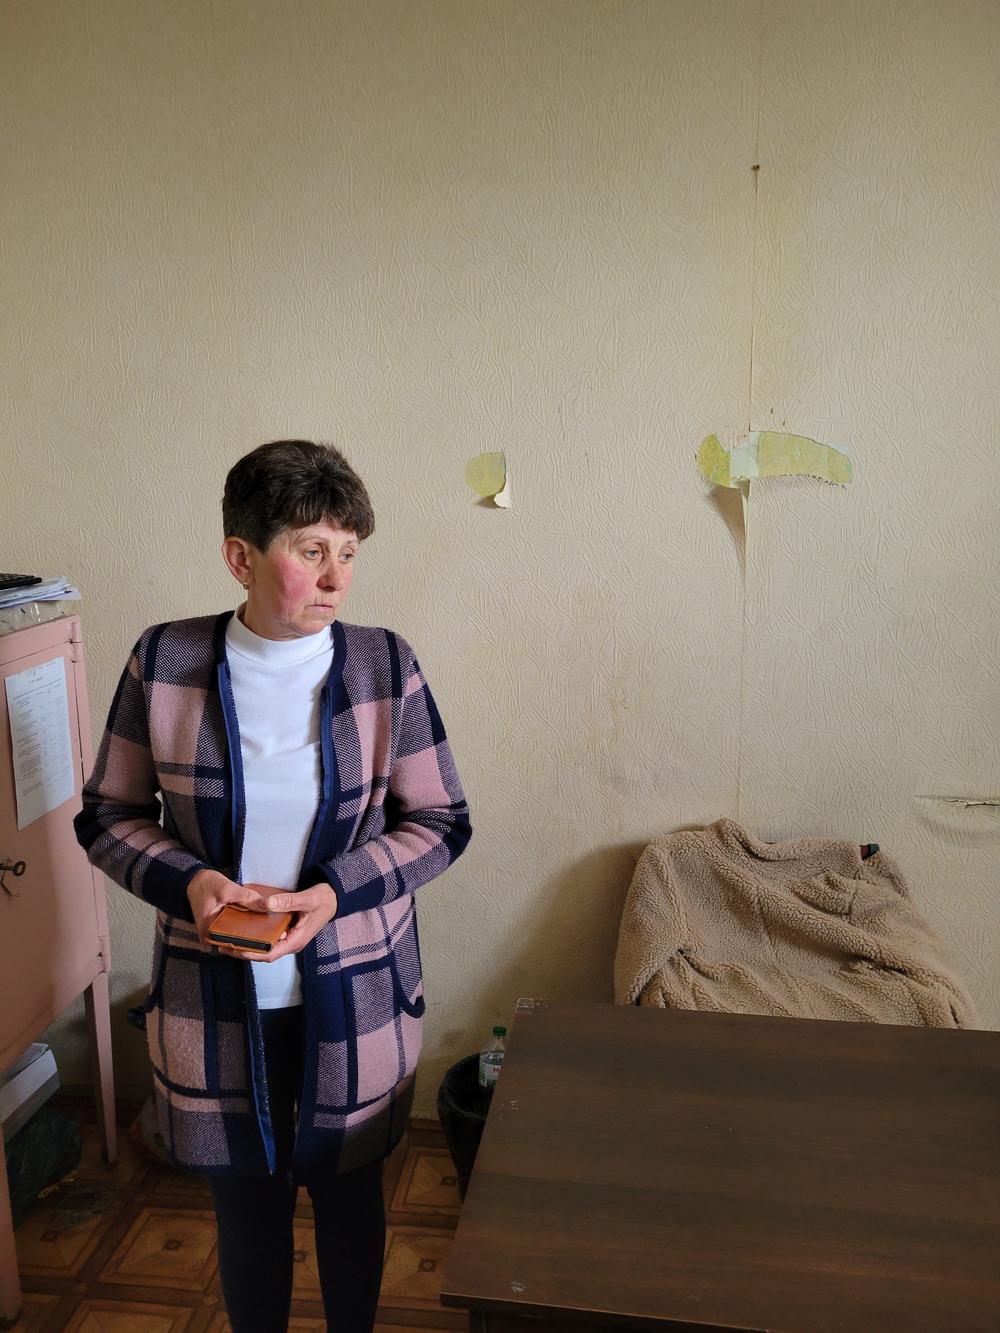 Viktoria Andrusha's mother, Kateryna Andrusha, in her office, damaged by Russian soldiers.